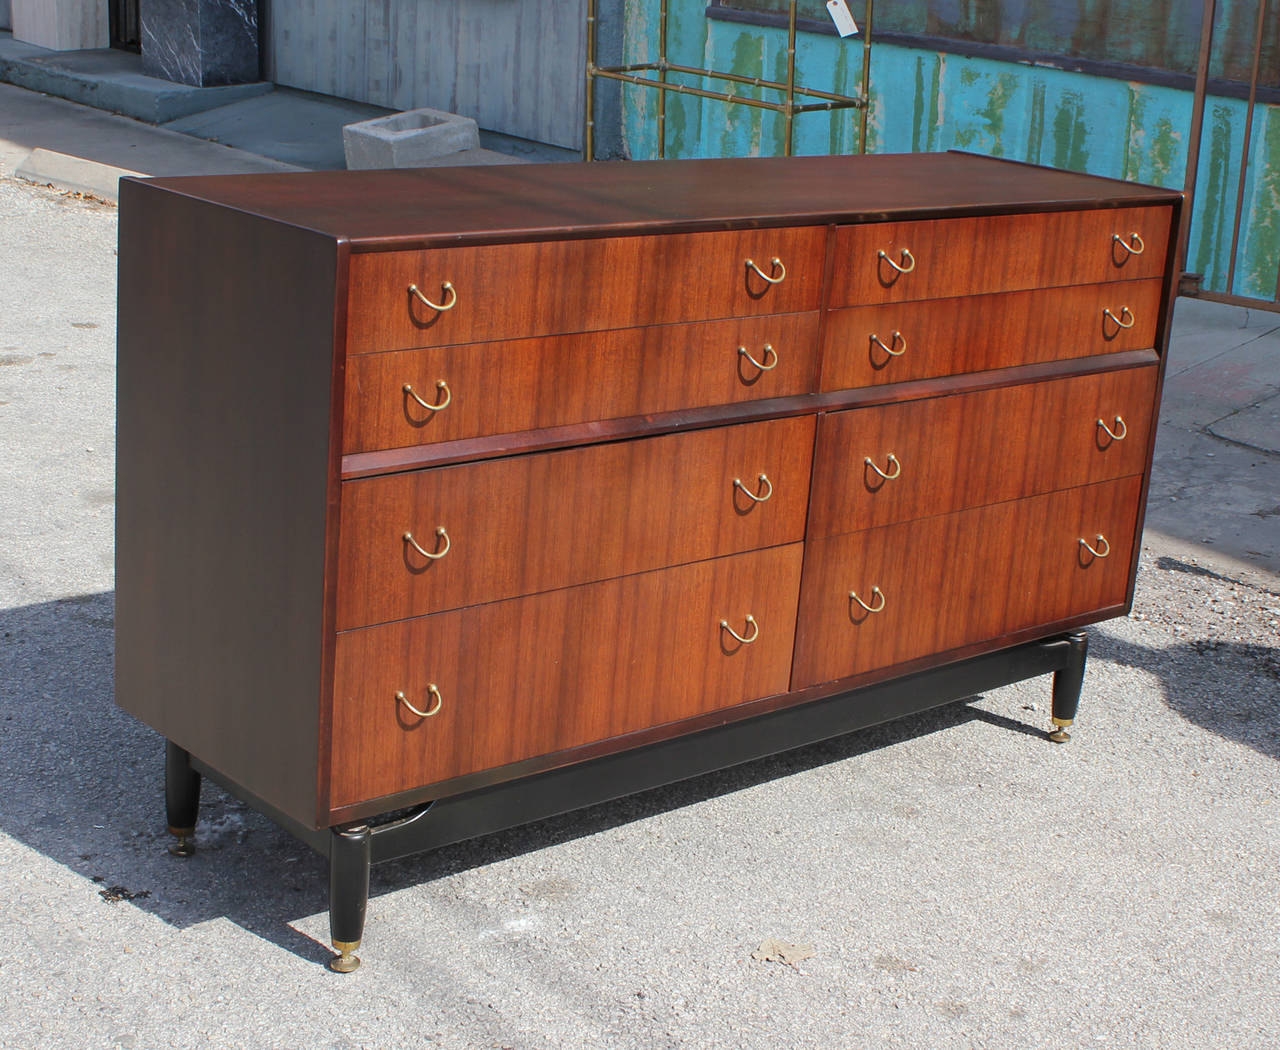 Wonderful dresser sits atop a black lacquered base with brass levelers and accents. Eight drawers provide ample storage. Beautiful grain and excellent construction.

Matching lingerie chest available.